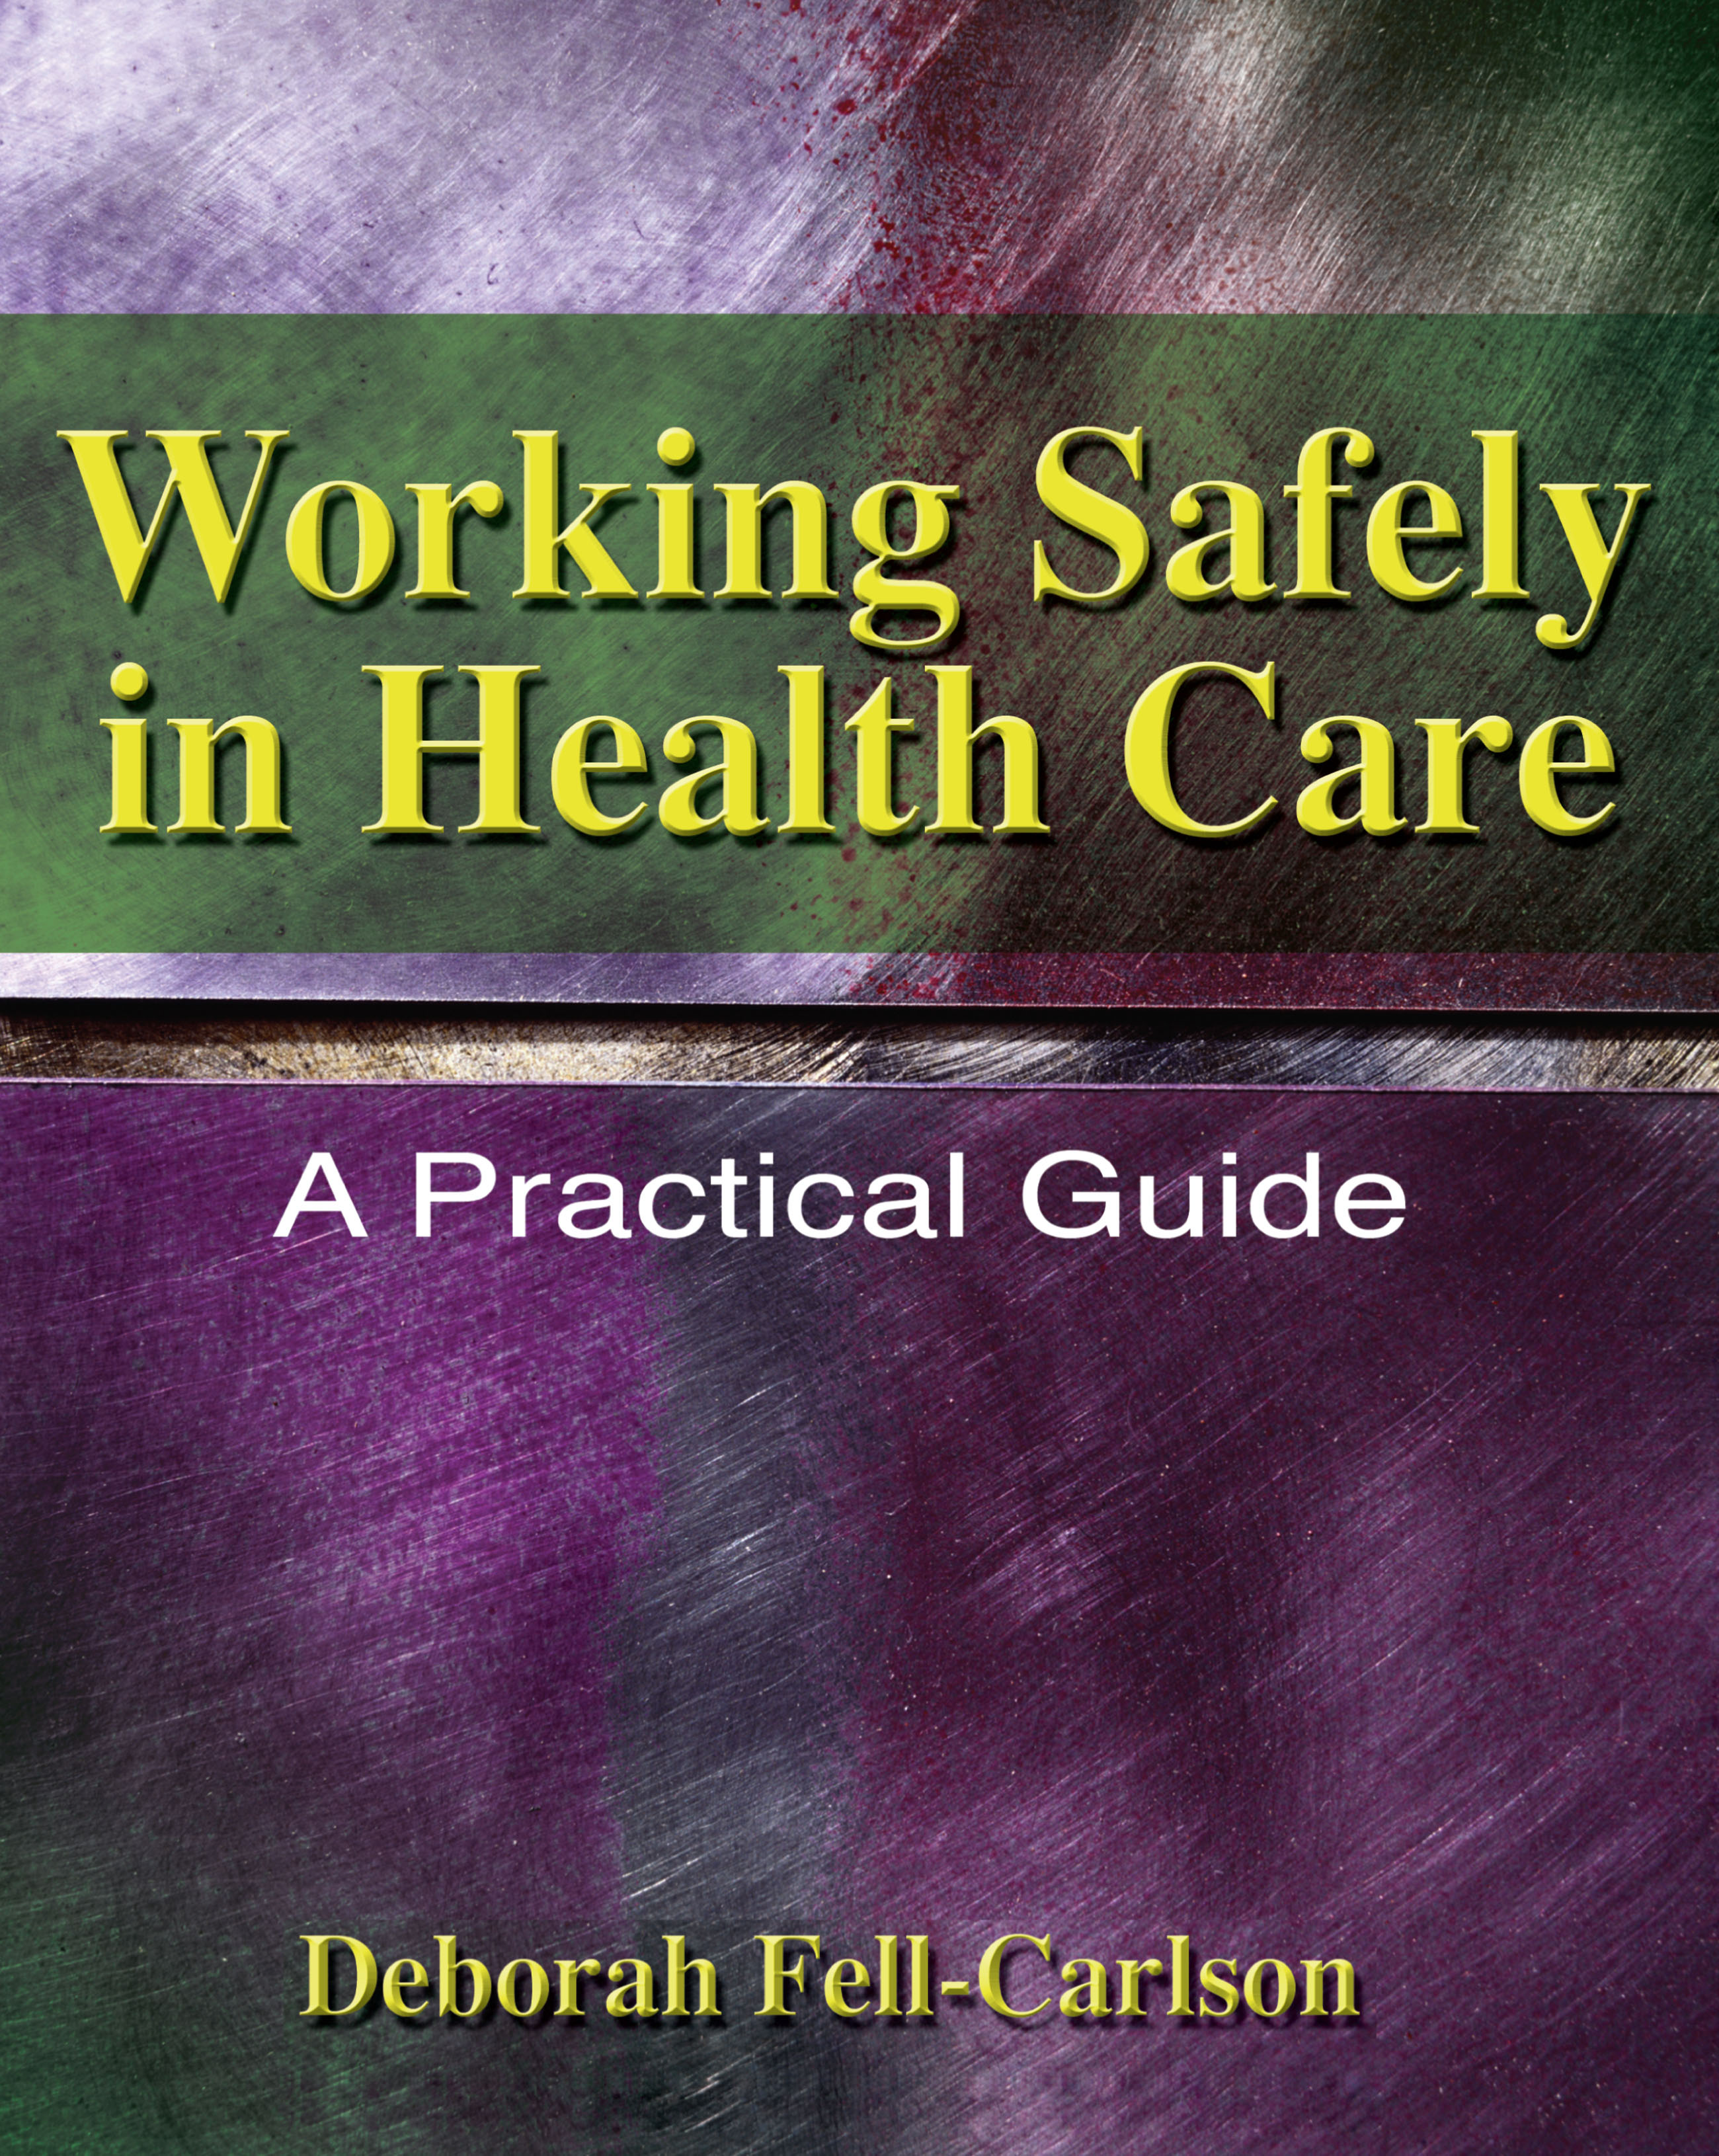 Working Safely in Health Care: A Practical Guide